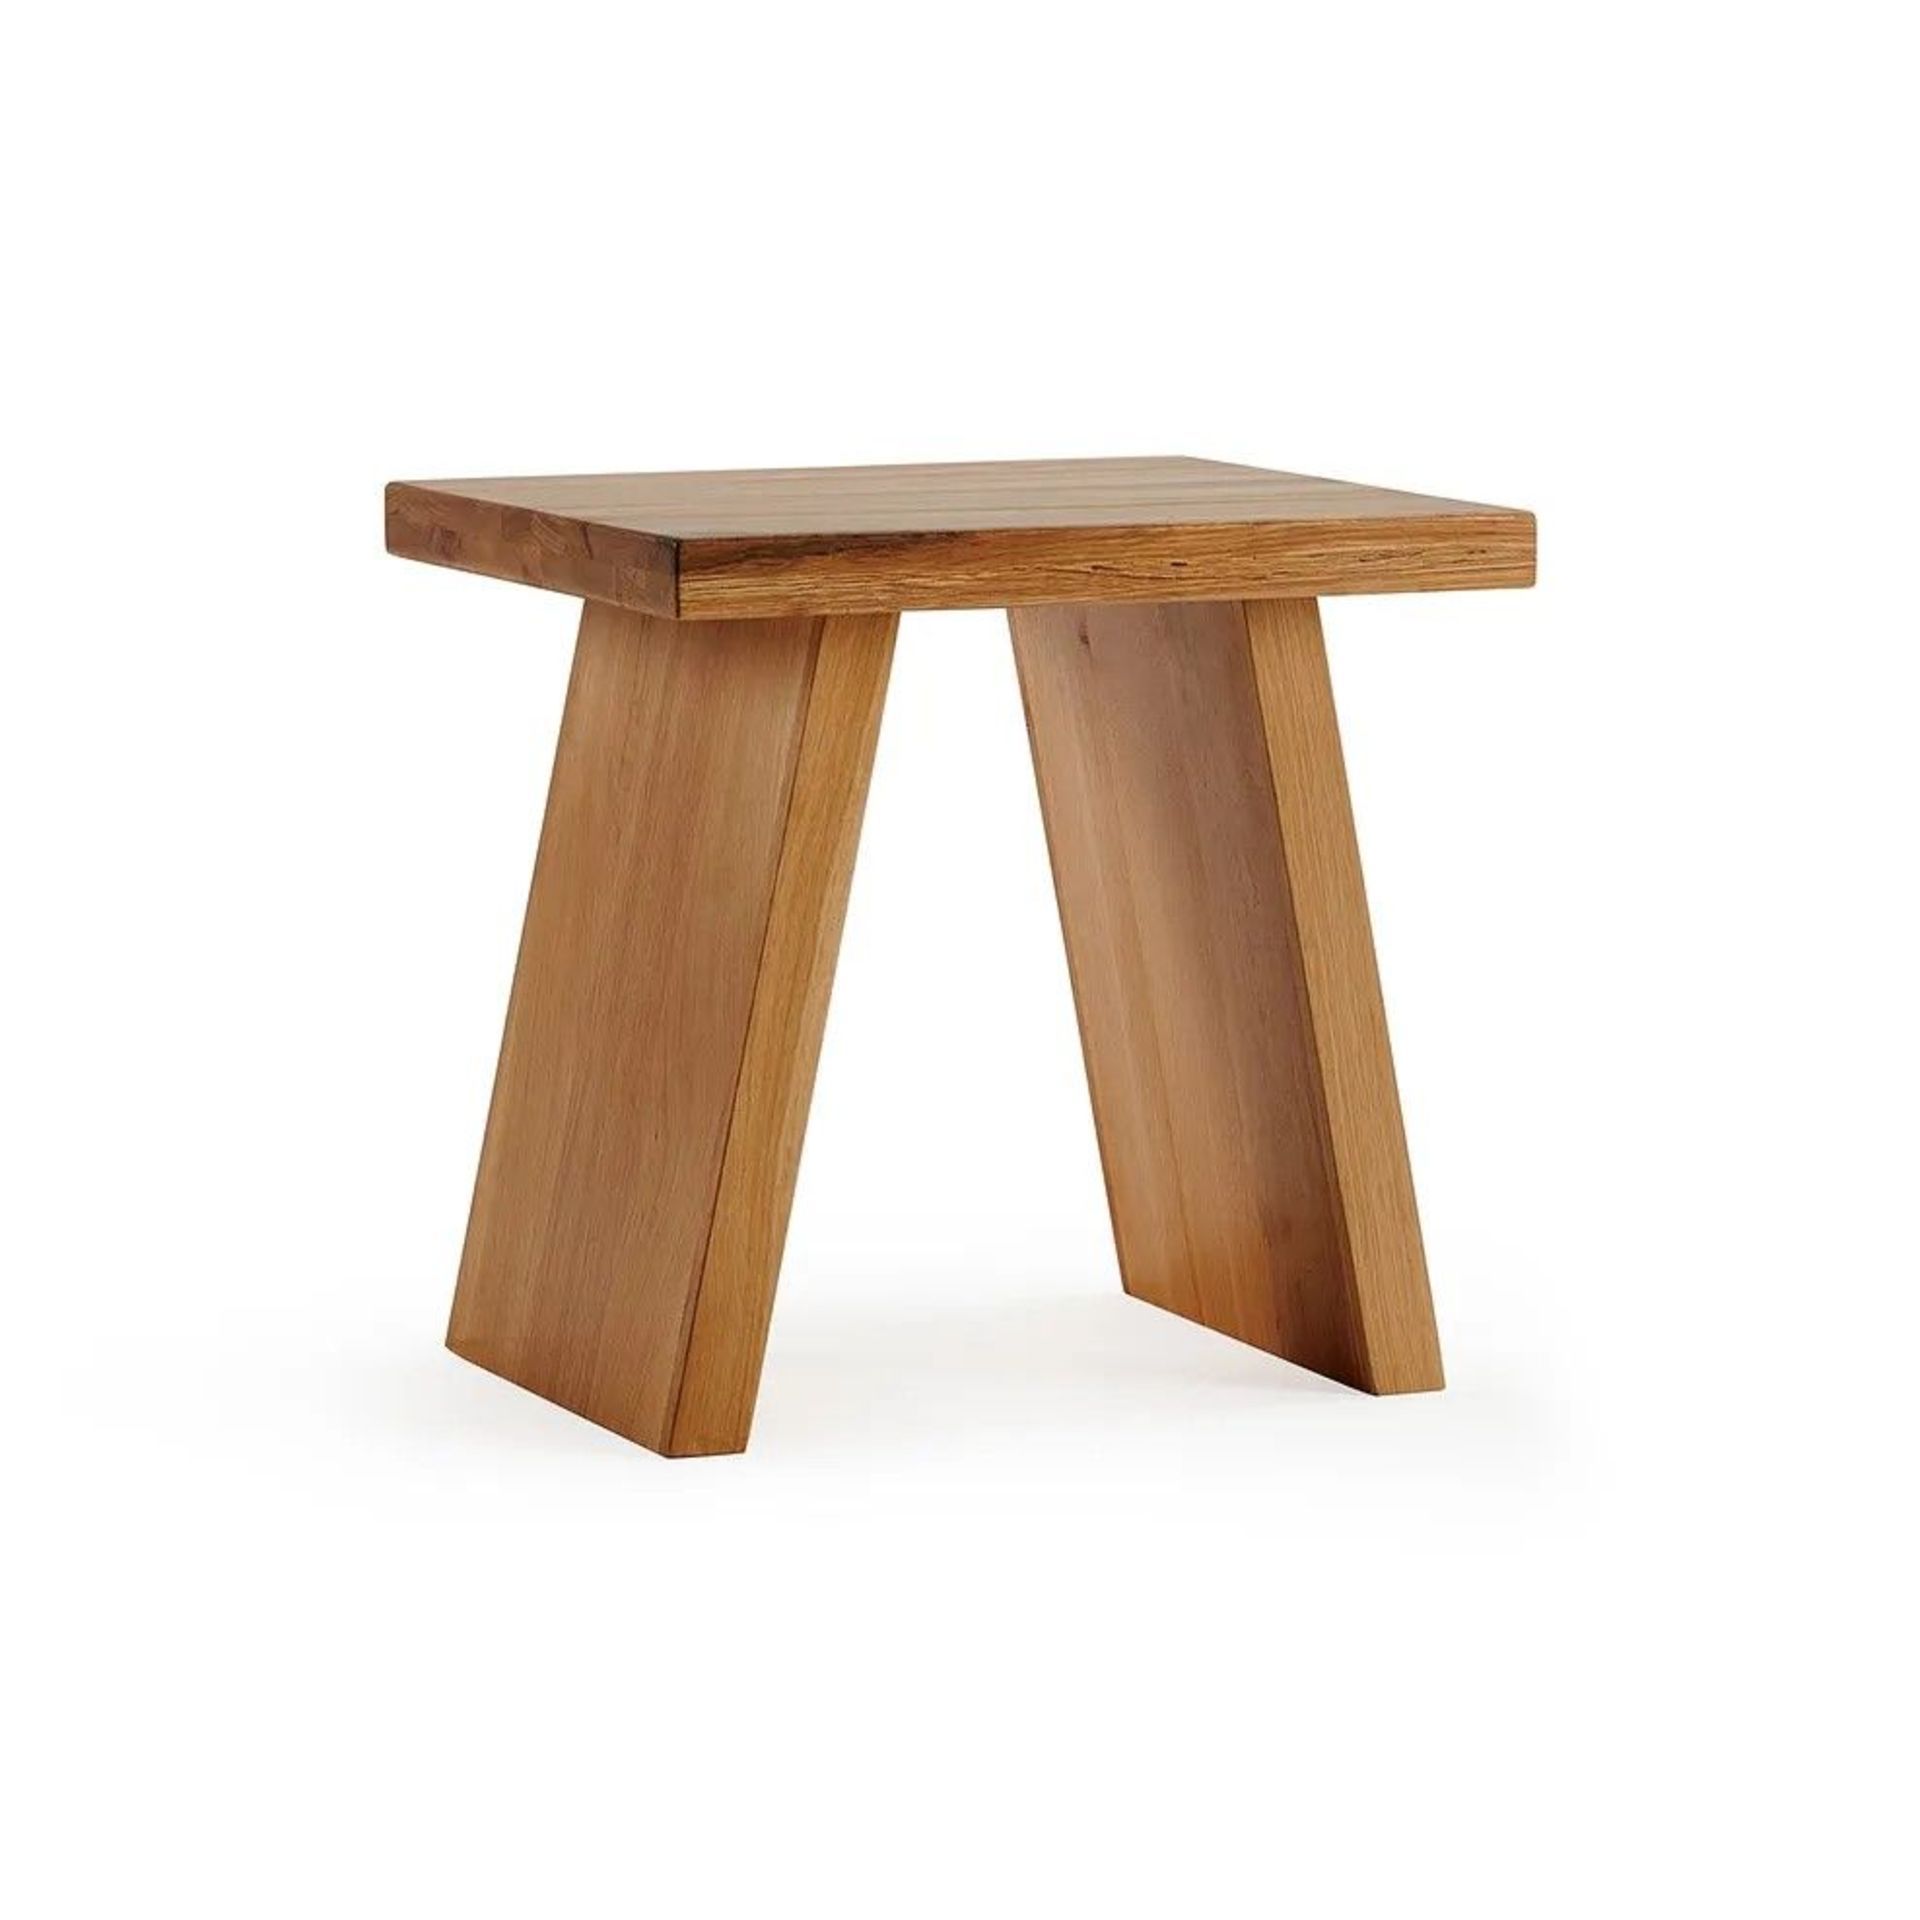 NEW BOXED Natural Solid Oak Stool. RRP £130. For a more open seating environment in the kitchen